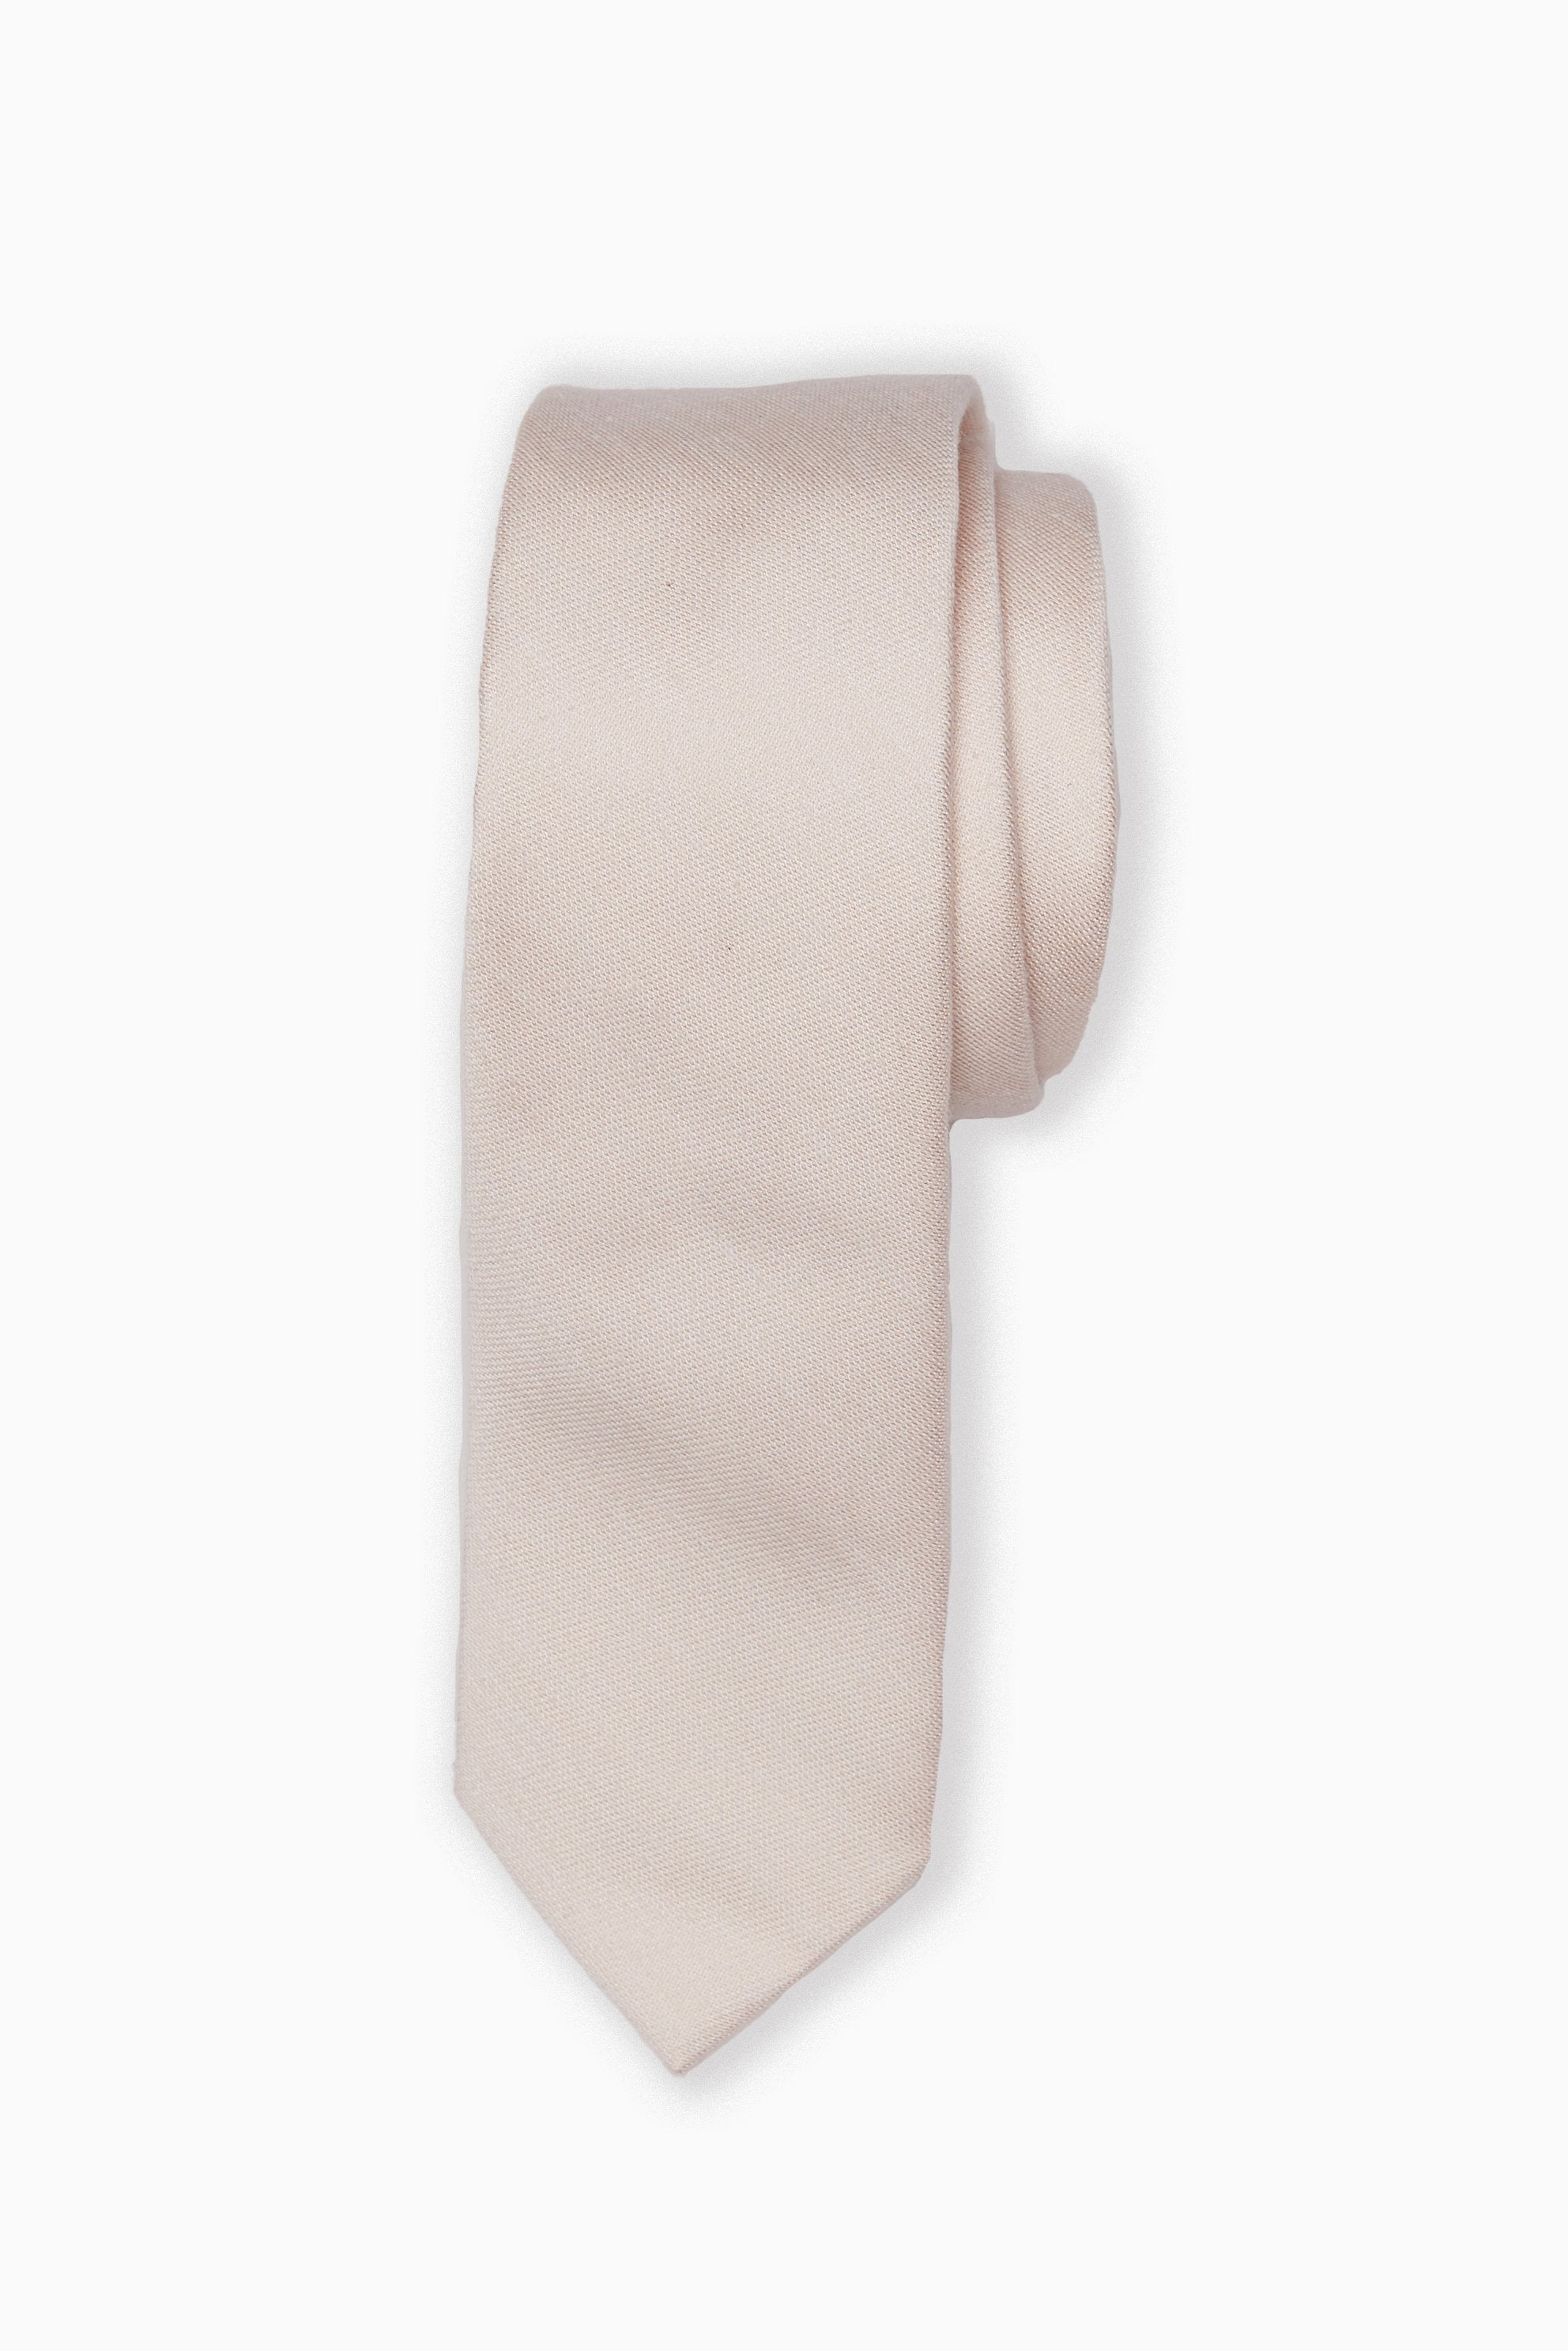 Simon Necktie in Pale Blush by Birdy Grey, front view